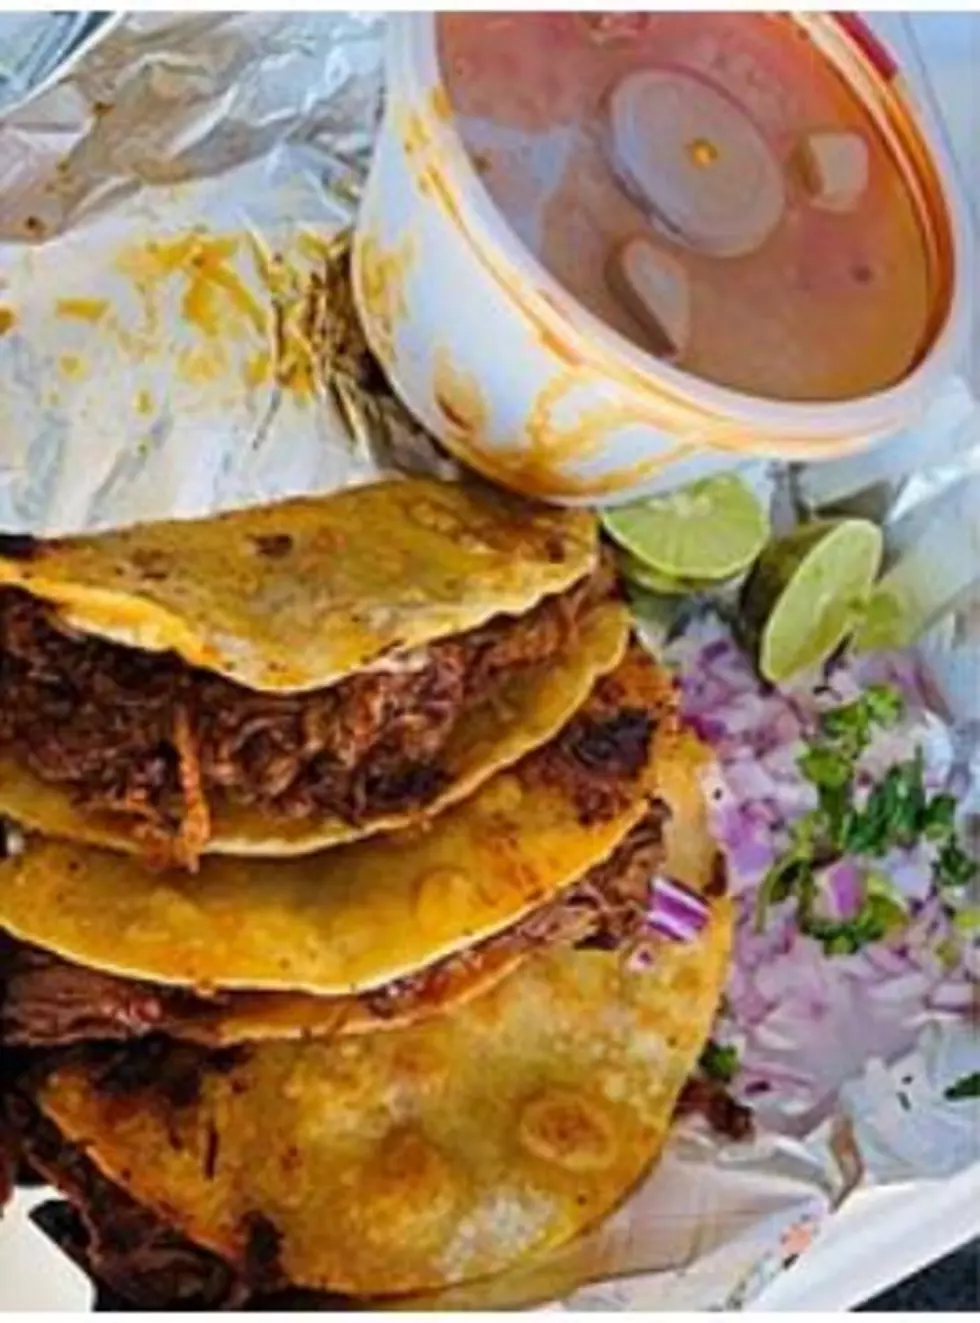 Are These Birria Tacos The Best In Midland-Odessa?